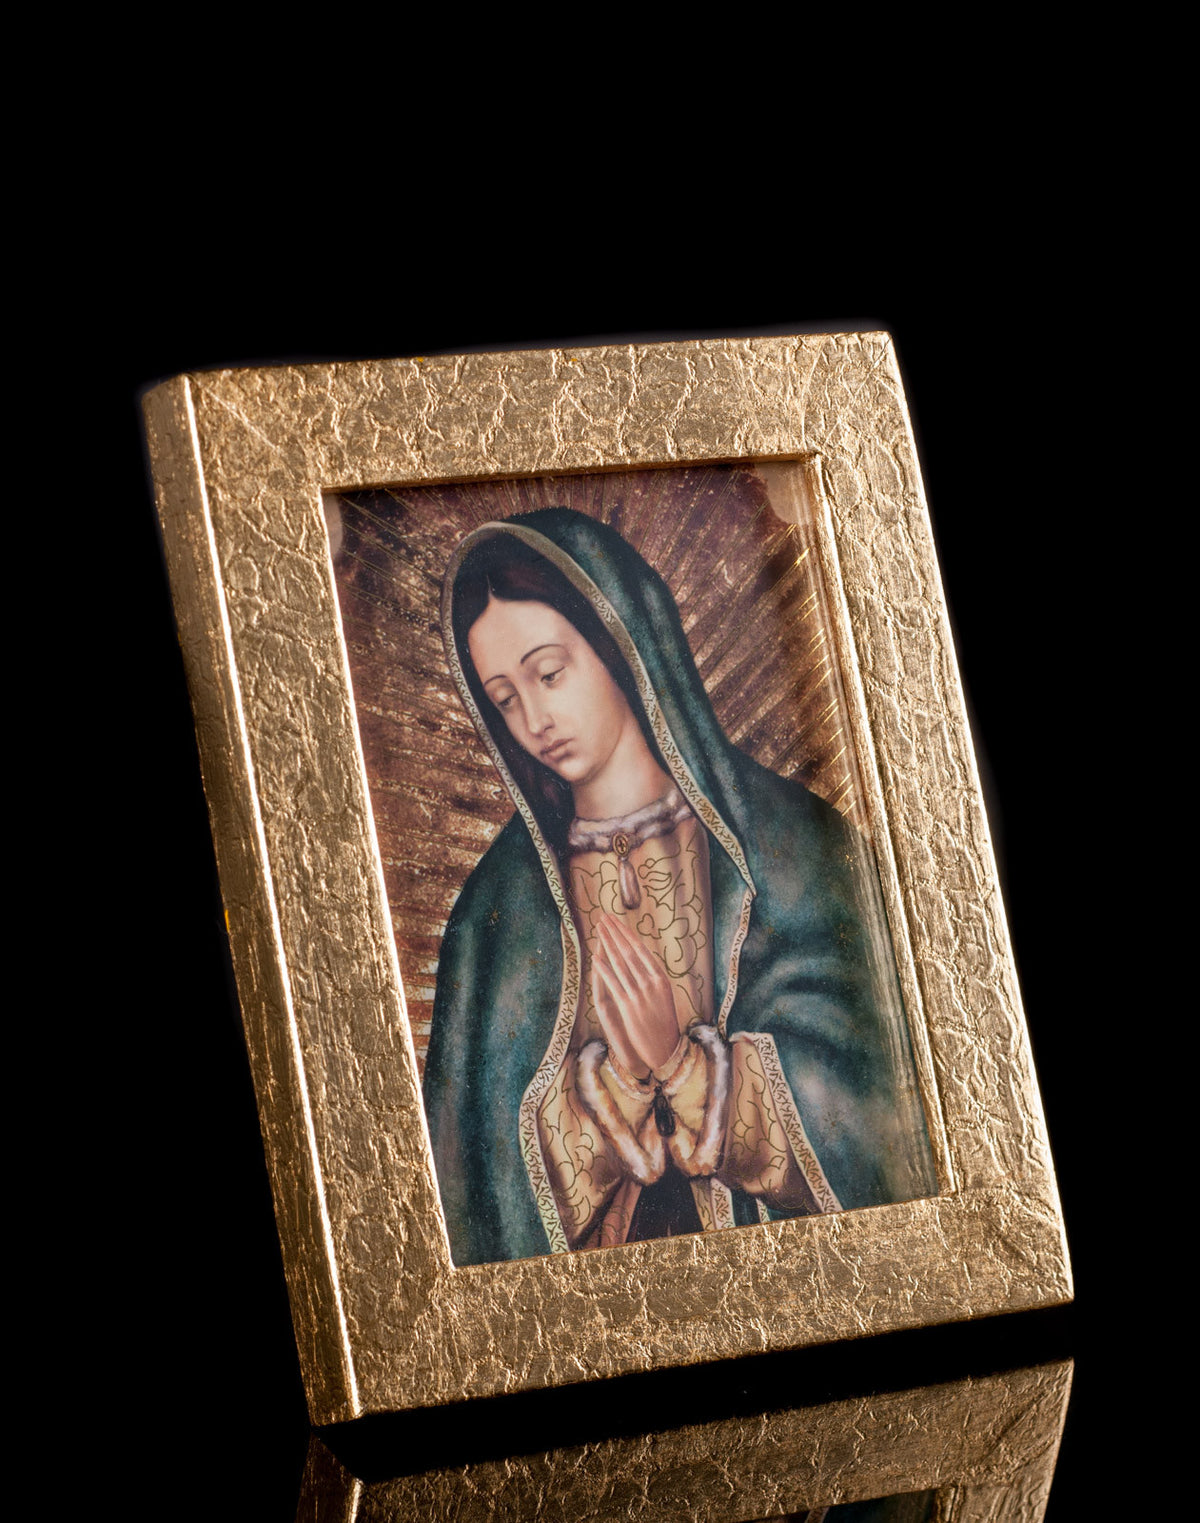 6.2" BUST OF OUR LADY VIRGIN OF GUADALUPE WITH GOLDEN LEAF FRAME